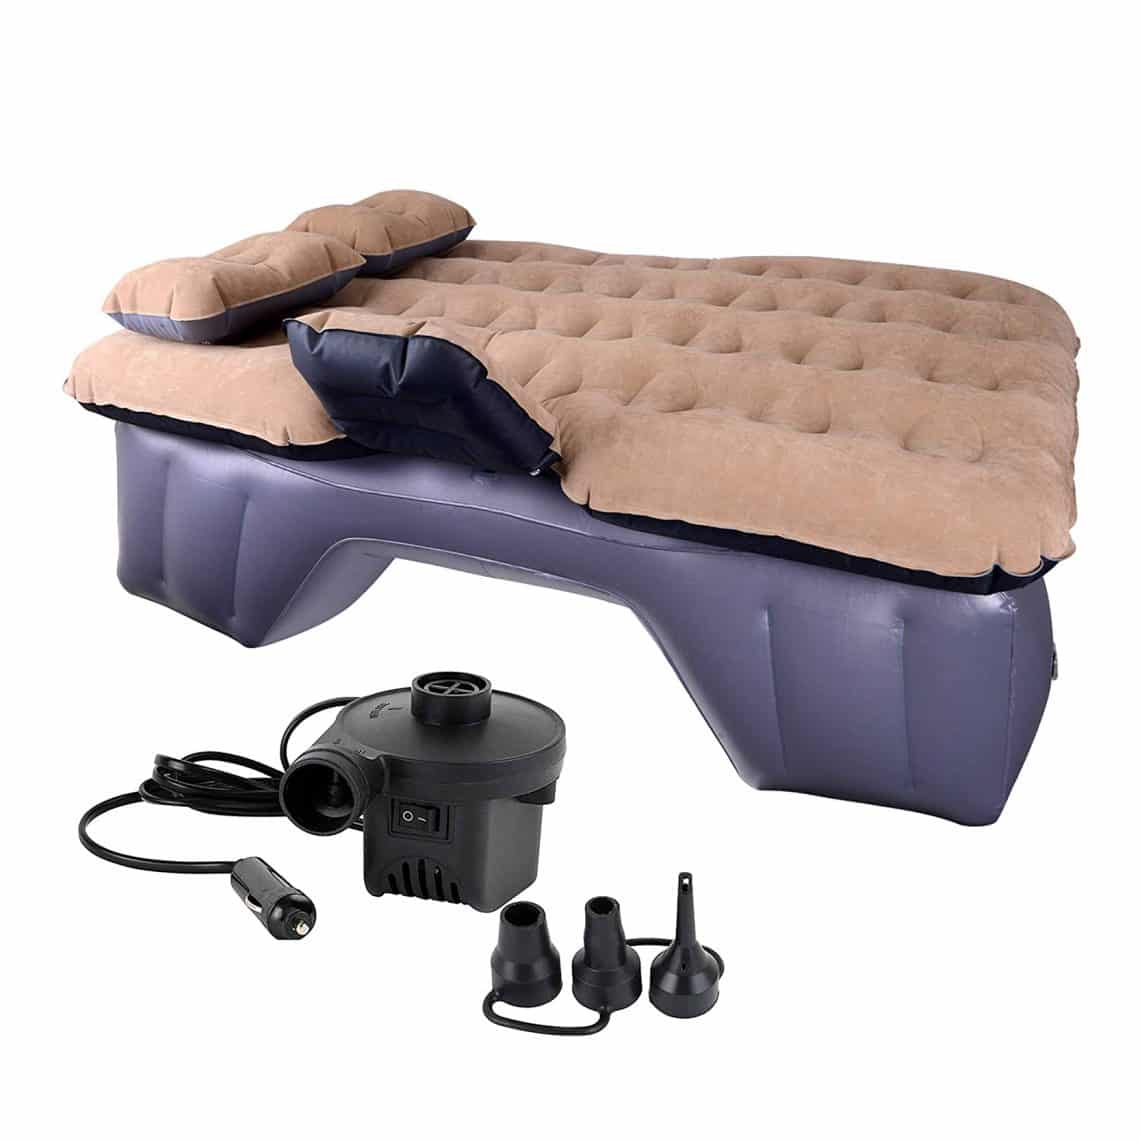 Top 10 Best Suv Air Mattress In 2023 Reviews Buyers Guide